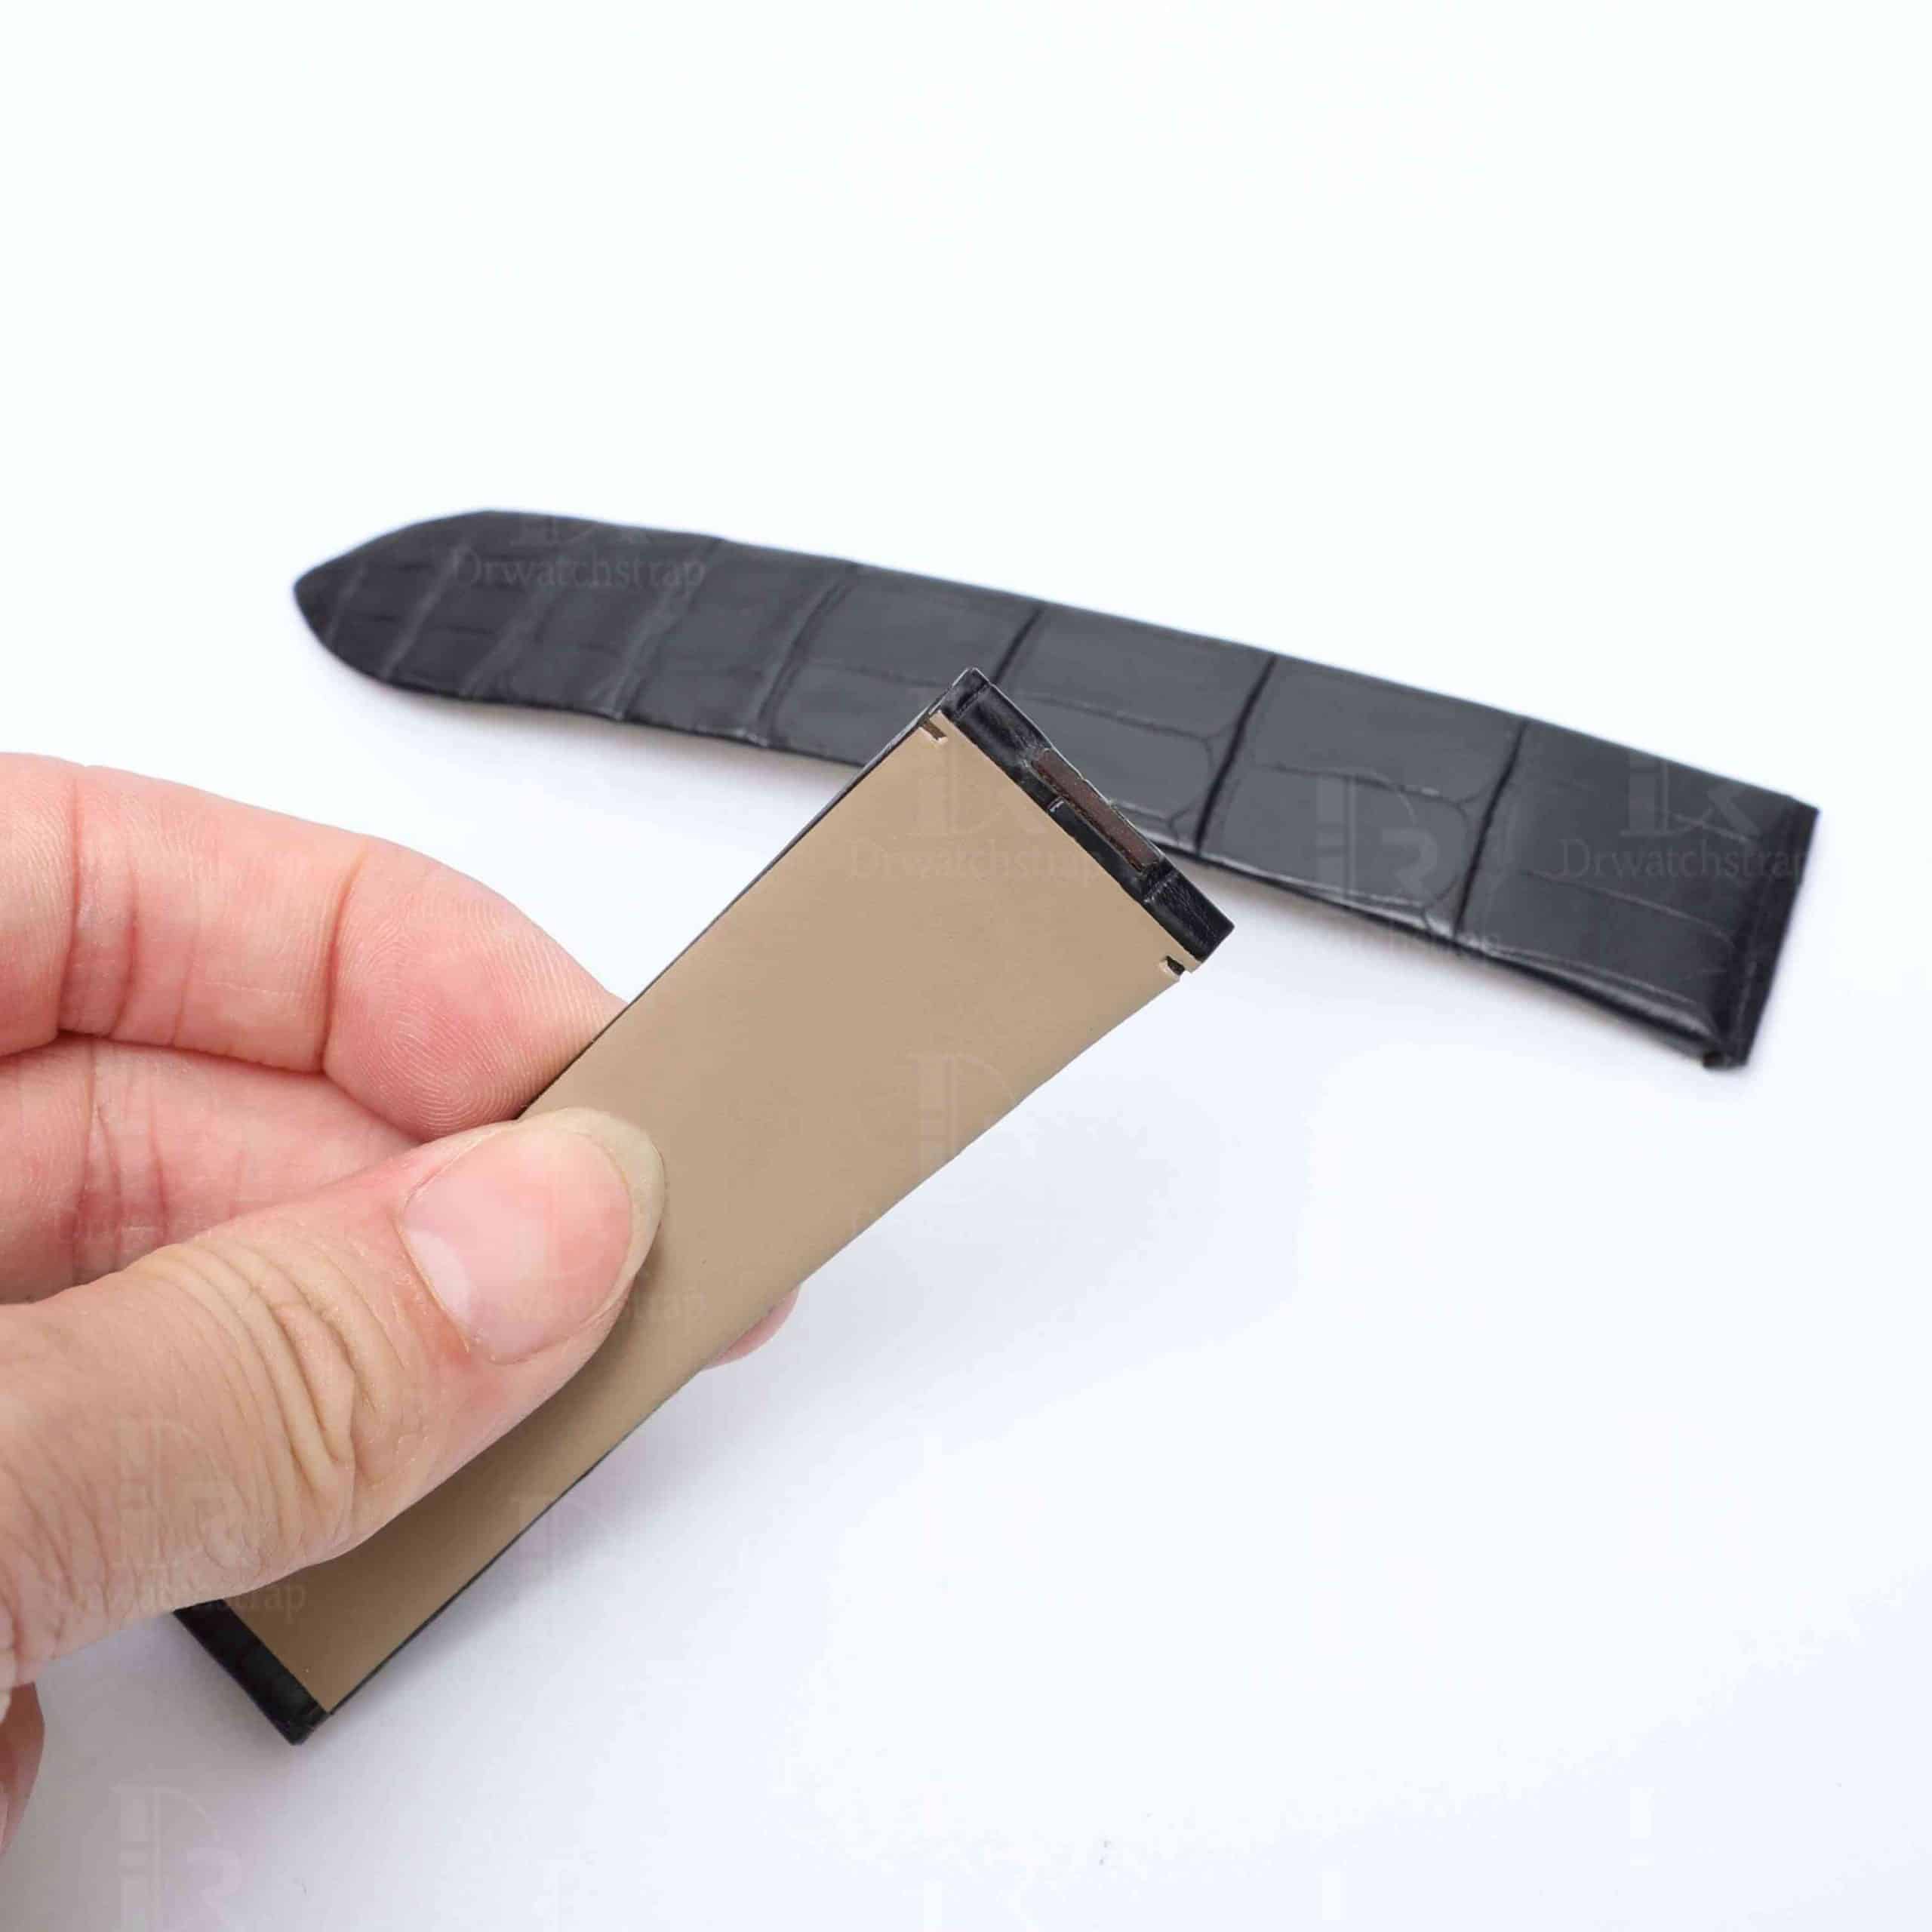 High-end genuine best quality OEM custom alligator leather black watch Cartier santos dumont strap and watch band replacement for Cartier Santos Dumont men's and women's watches for sale - Shop the premium Square-scale straps and watch bands at a low price